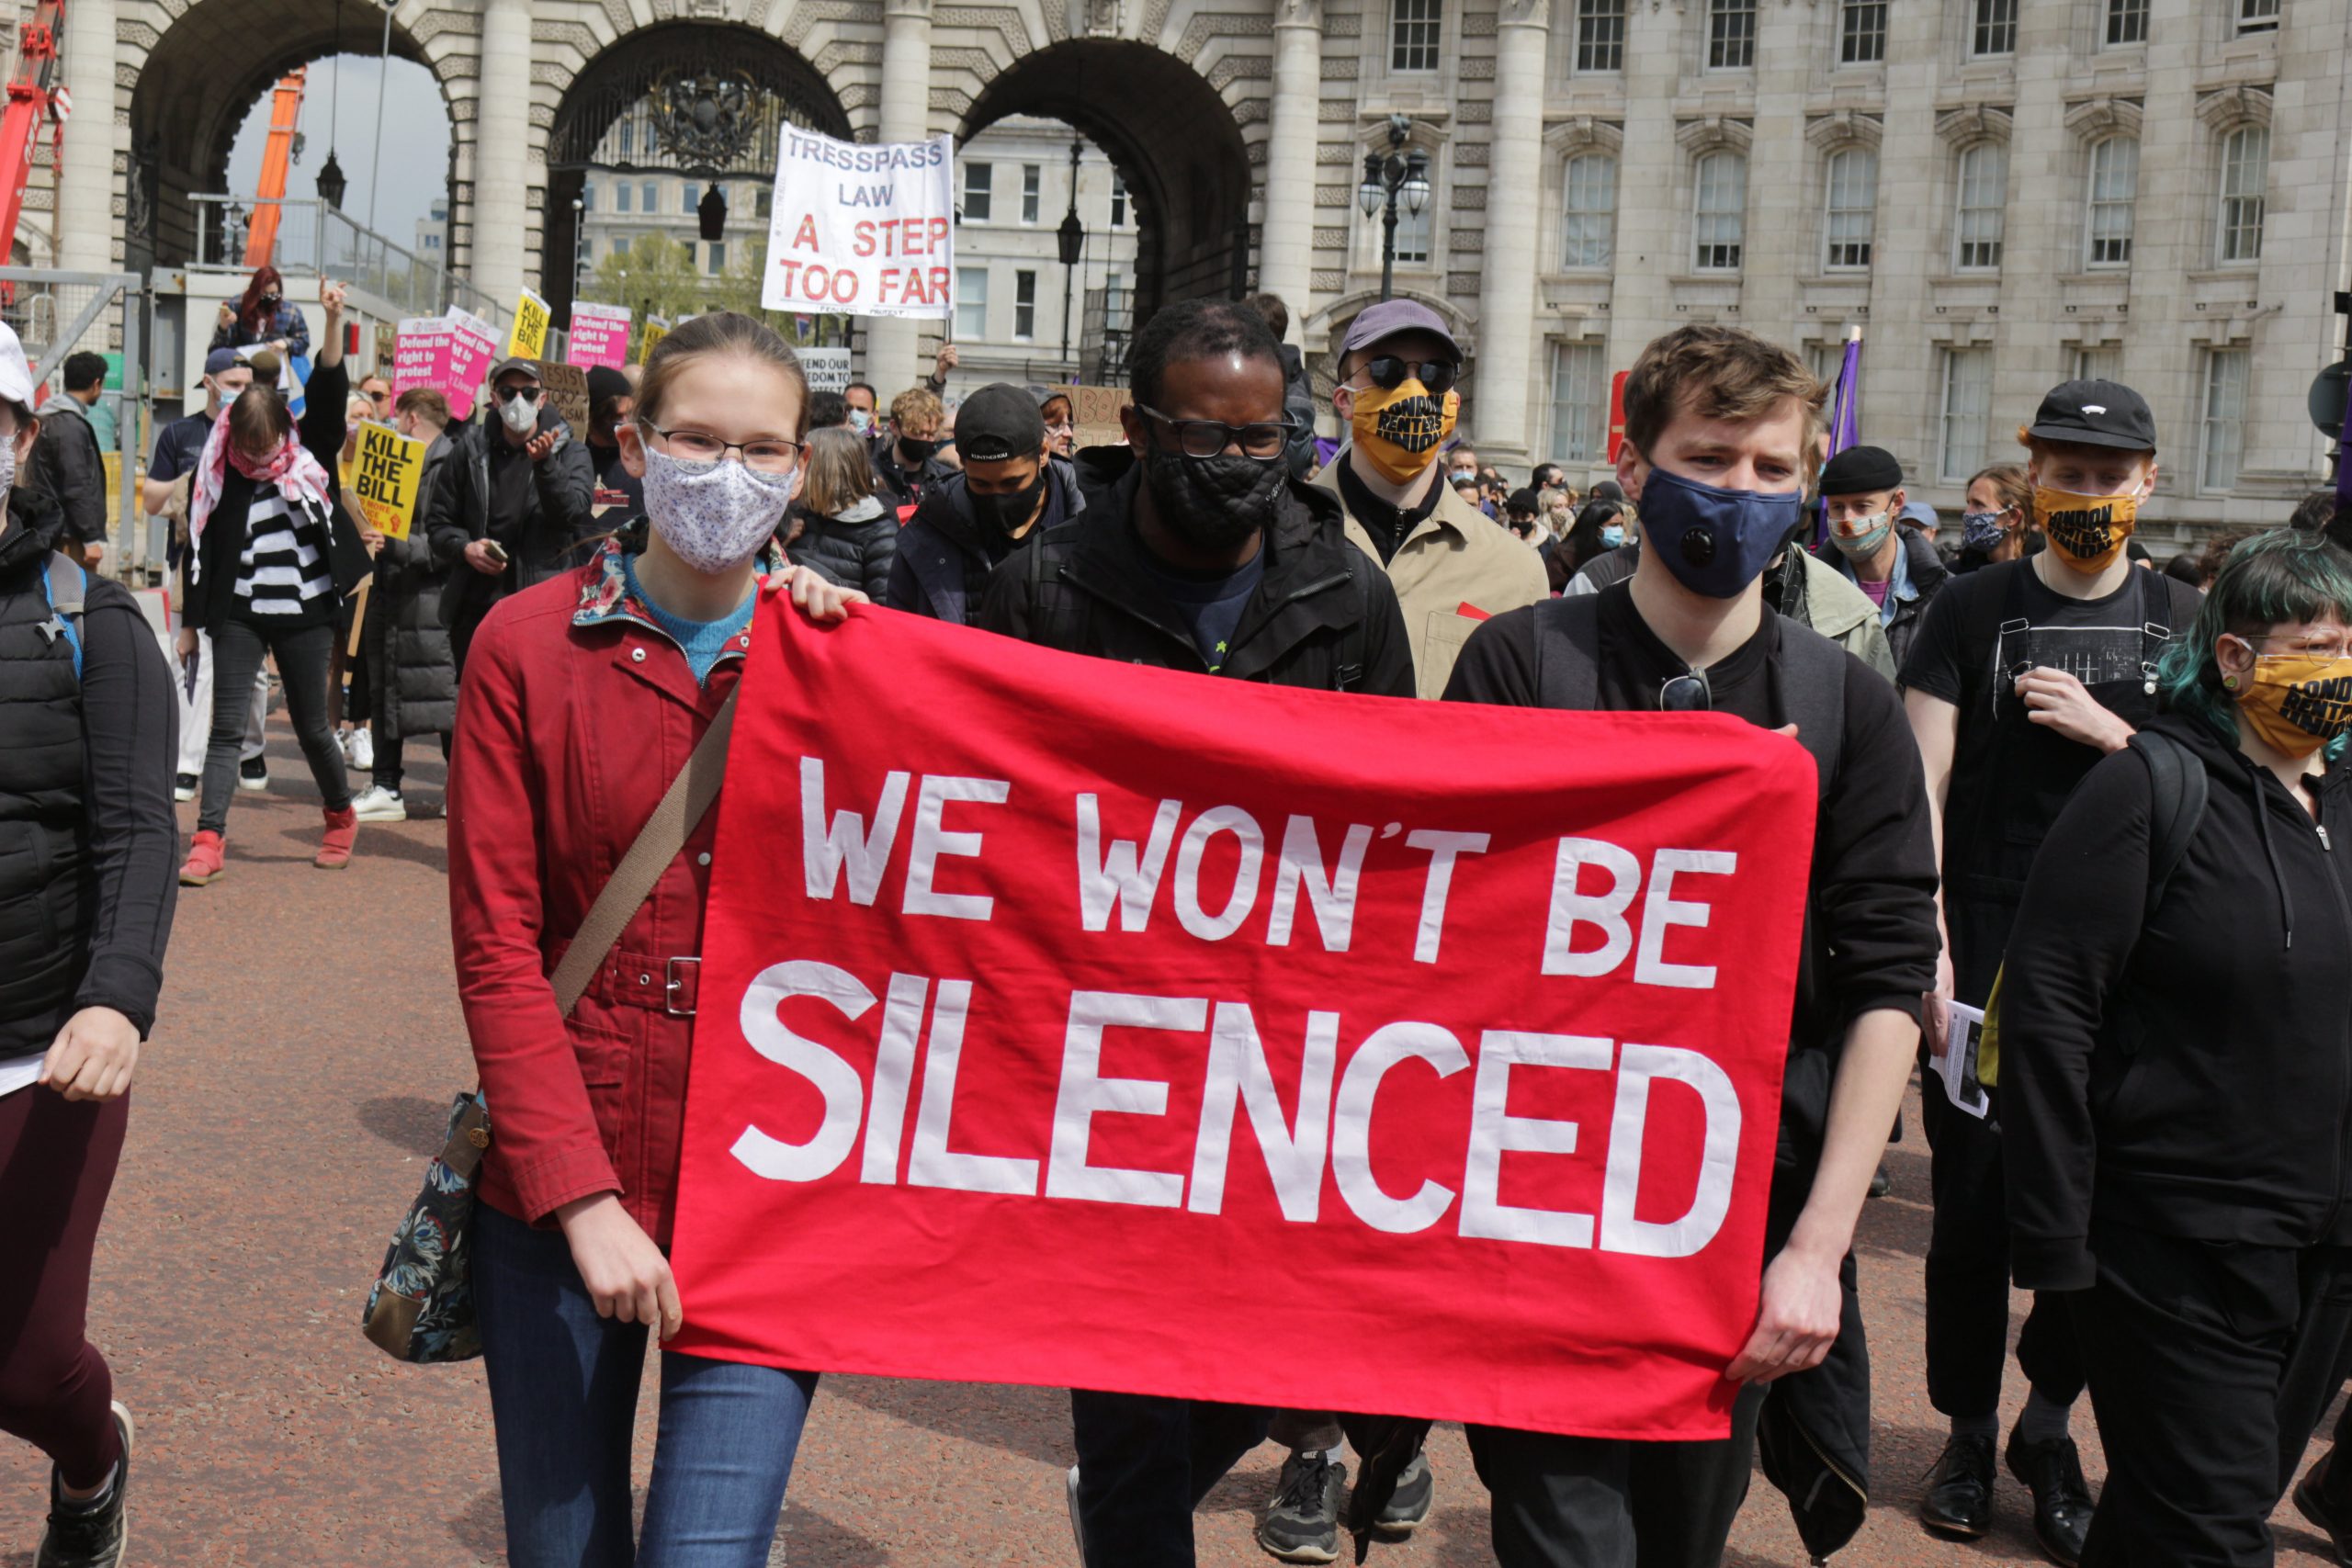 Three young protestors march through London on a Kill The Bill protest carrying a red banner with white writing on it which says 'We won't be silenced'